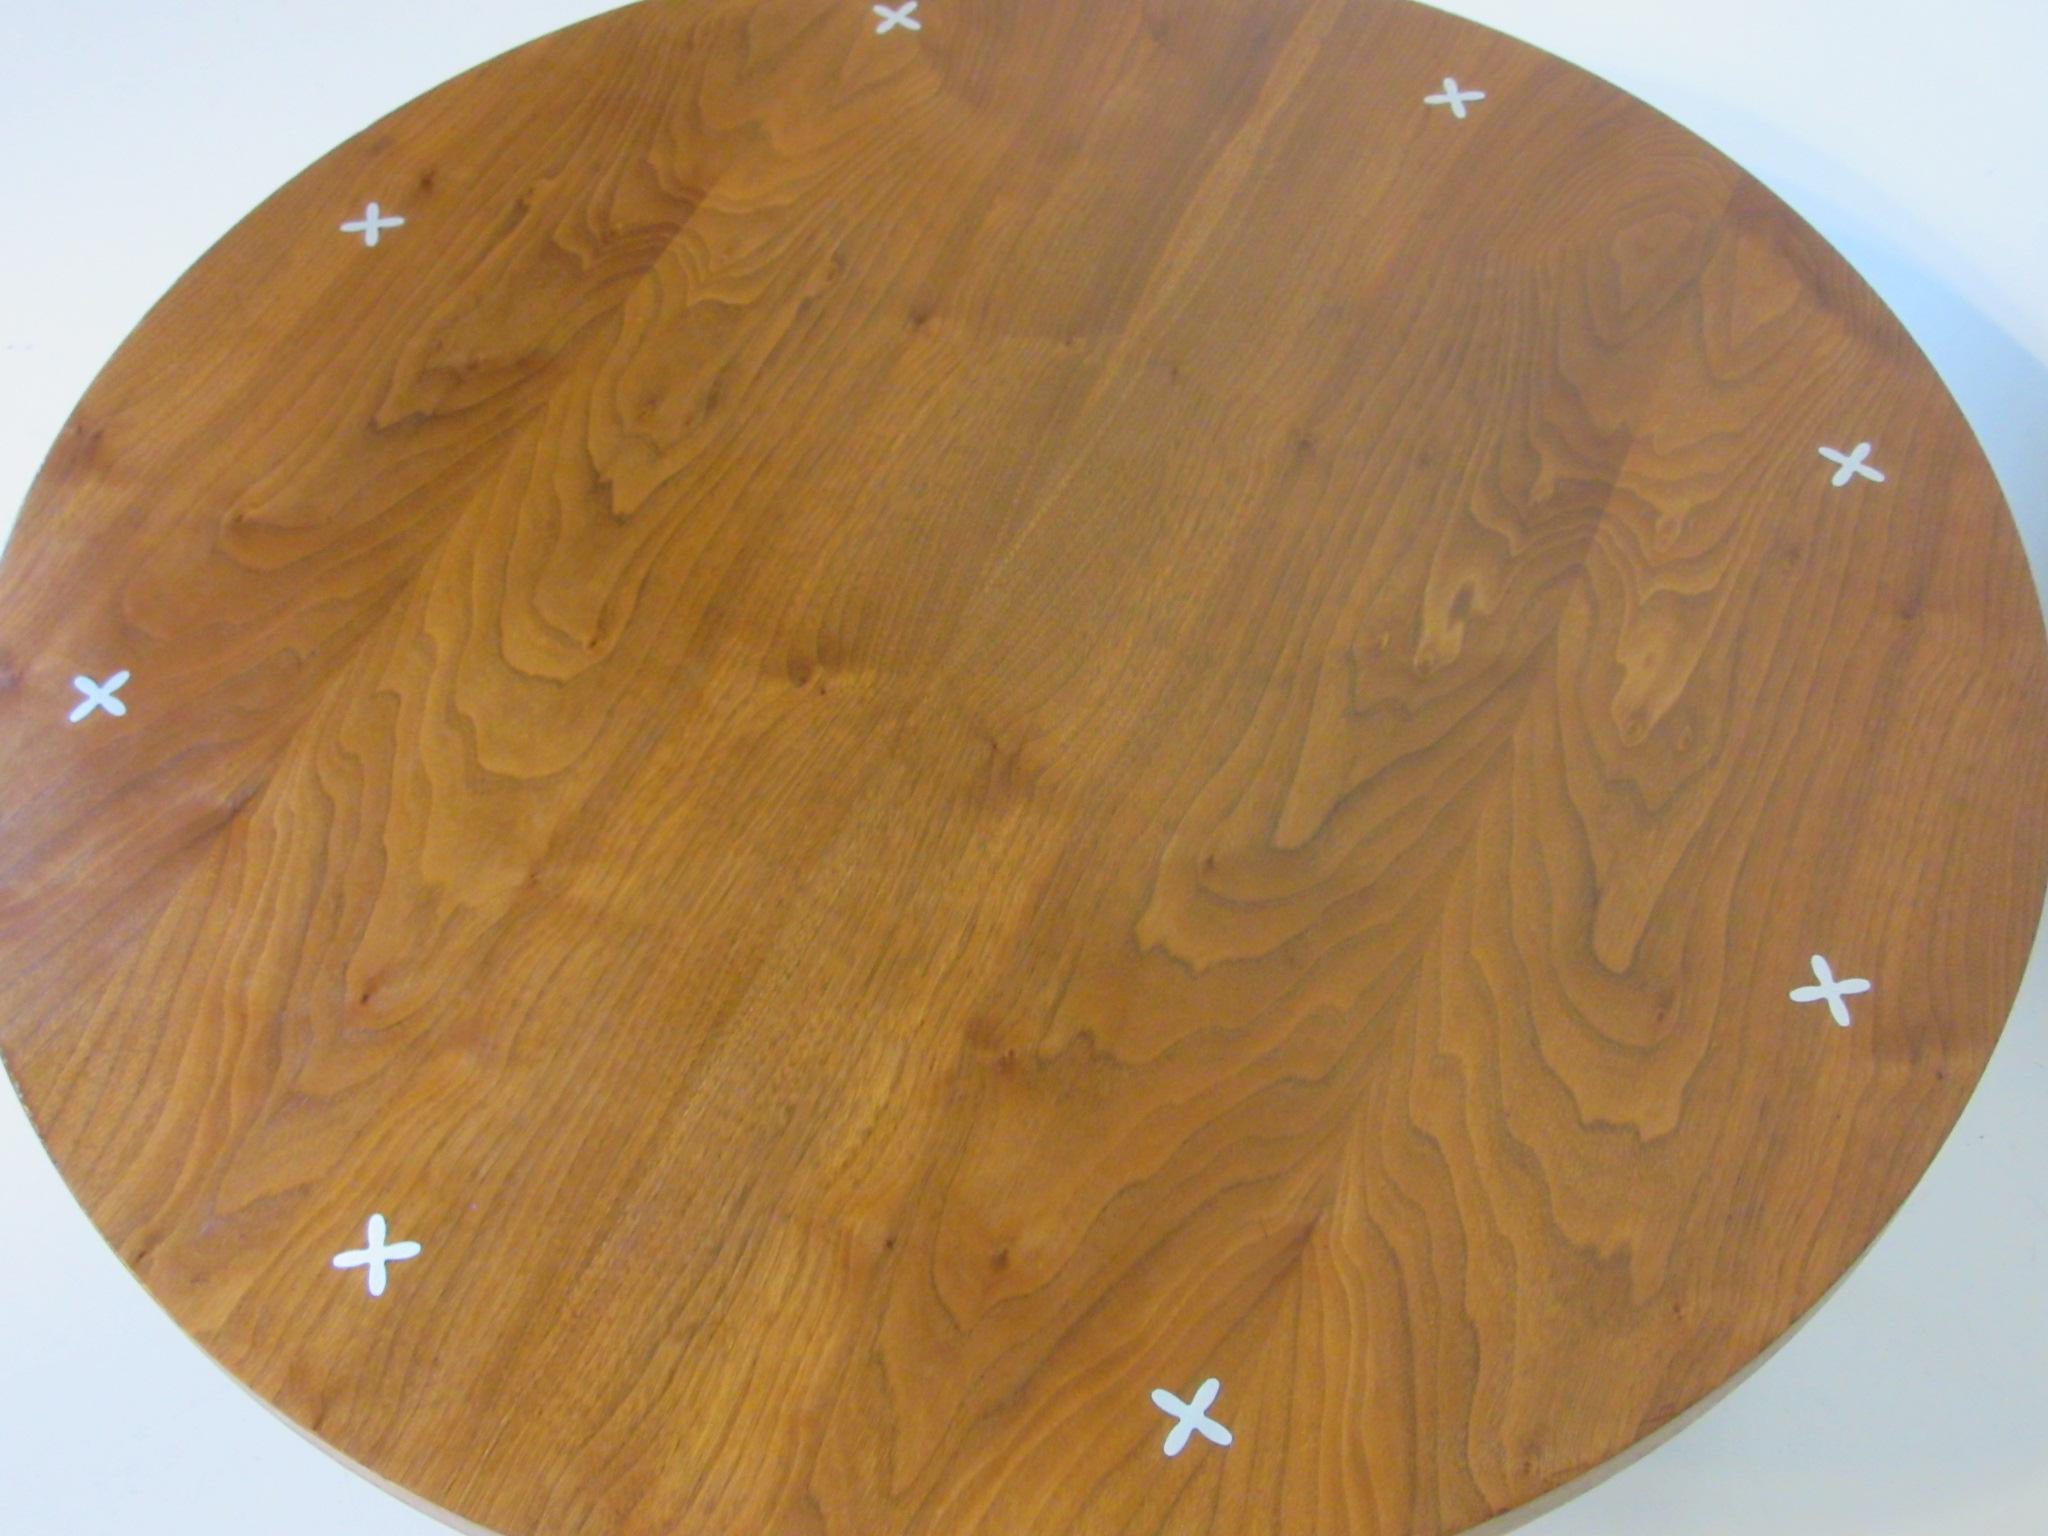 A very well grained round walnut coffee table with inlaid aluminum X patterns and nice rounded conical legs manufactured by American of Martinsville model # 3757. The flamed pattern of the wood top is just fantastic.